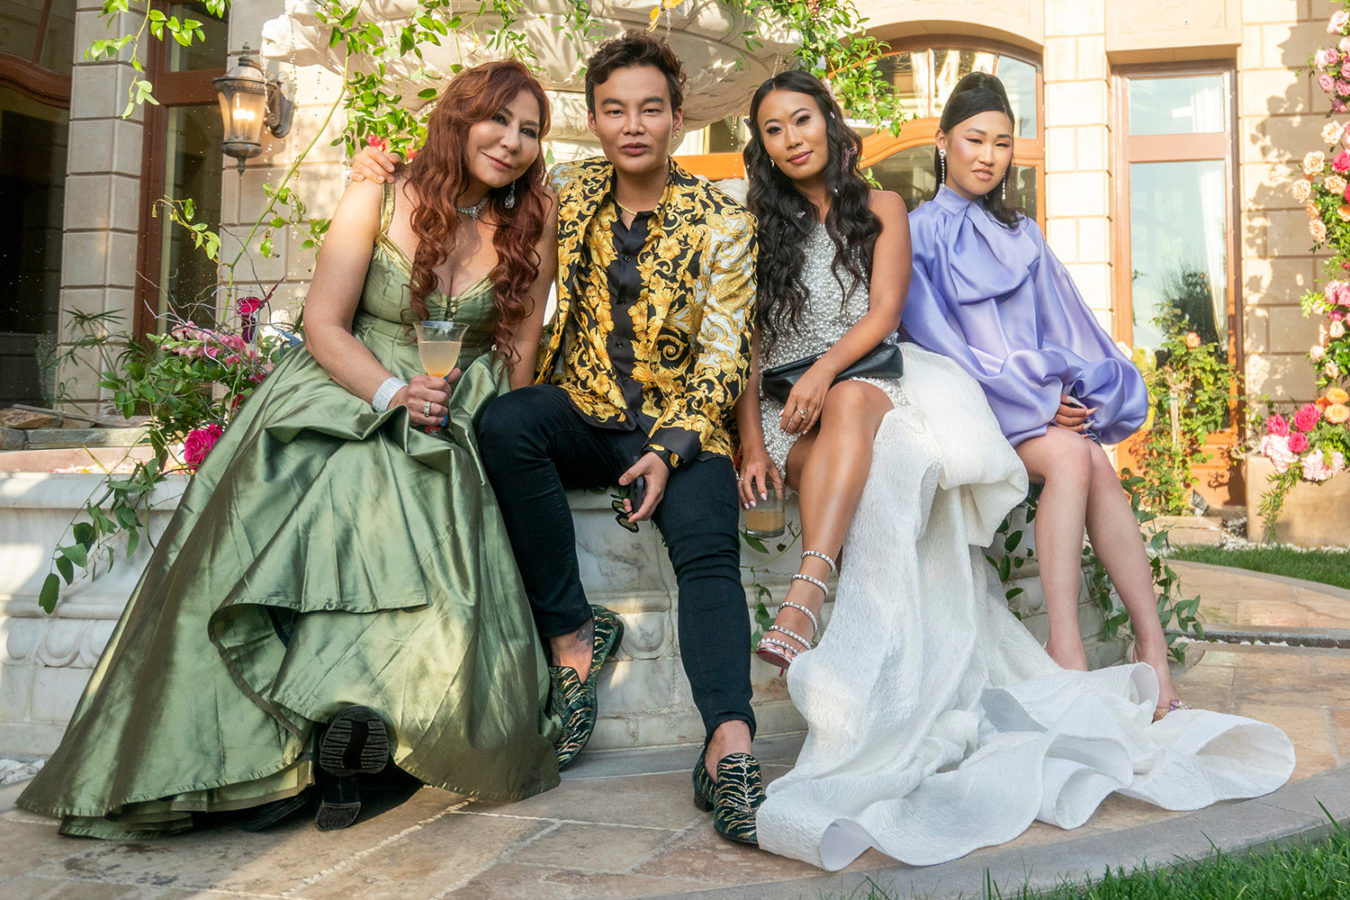 The Net Worth of the ‘Bling Empire’ Cast Will Leave You Shocked